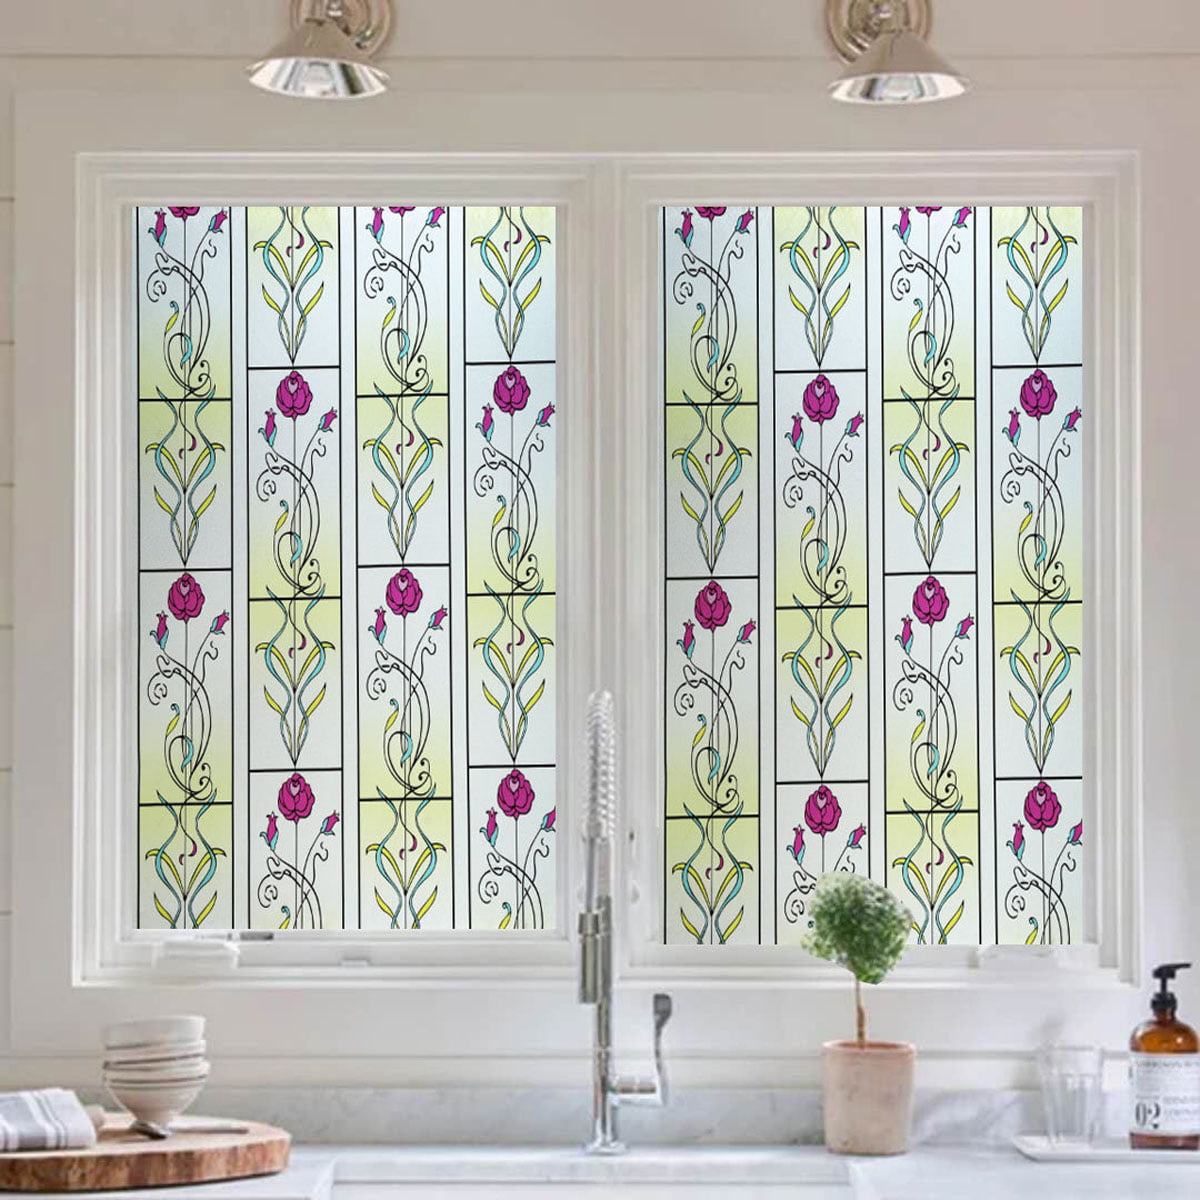 Details about   Static Cling Frosted Stained Glass Film Window Door Vinyl Sticker Home Decor PVC 